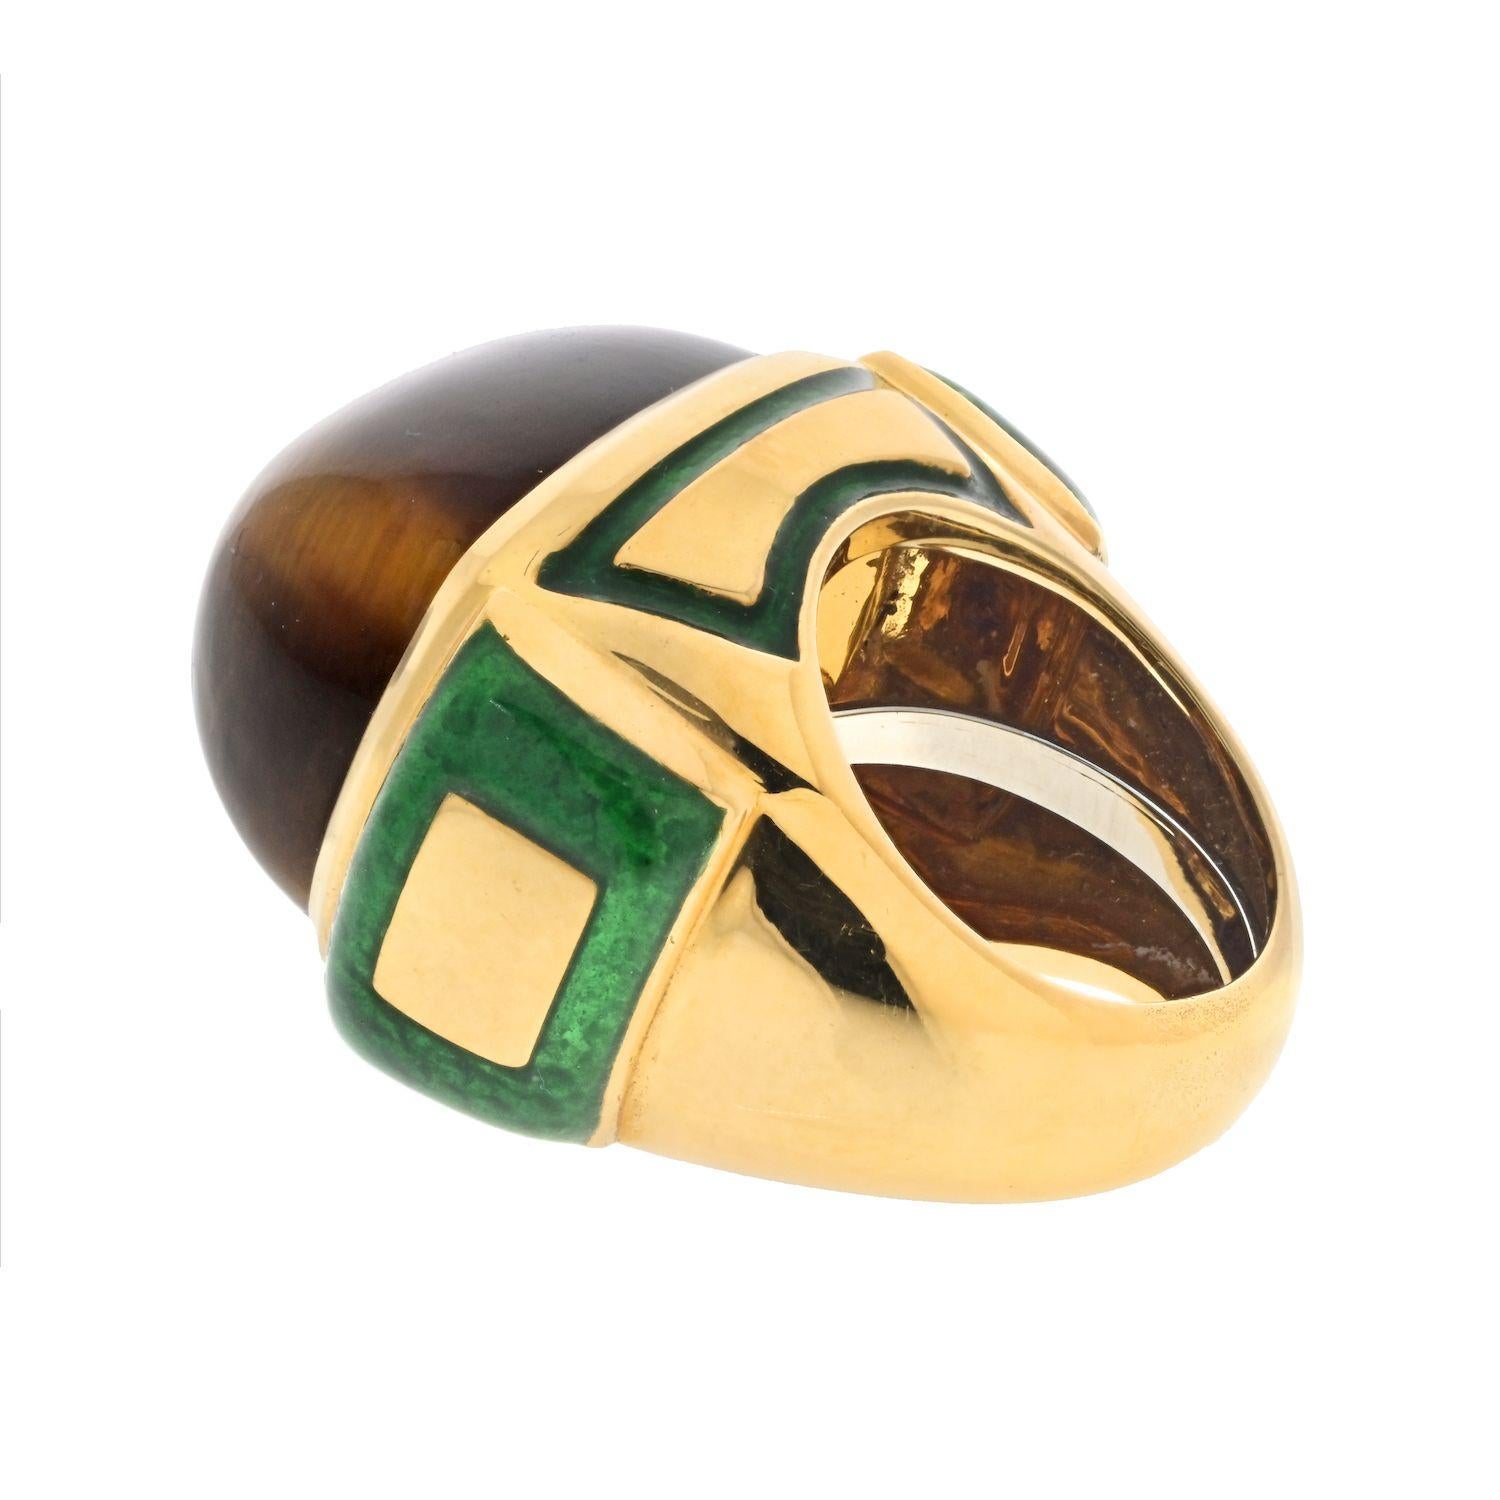 Beautiful cocktail ring, created in New York city at the atelier of David Webb, back in the 1970's. This bold ring was crafted in a geometric shape in solid yellow gold of 18 karats, with high polished finish and embellished with applications of